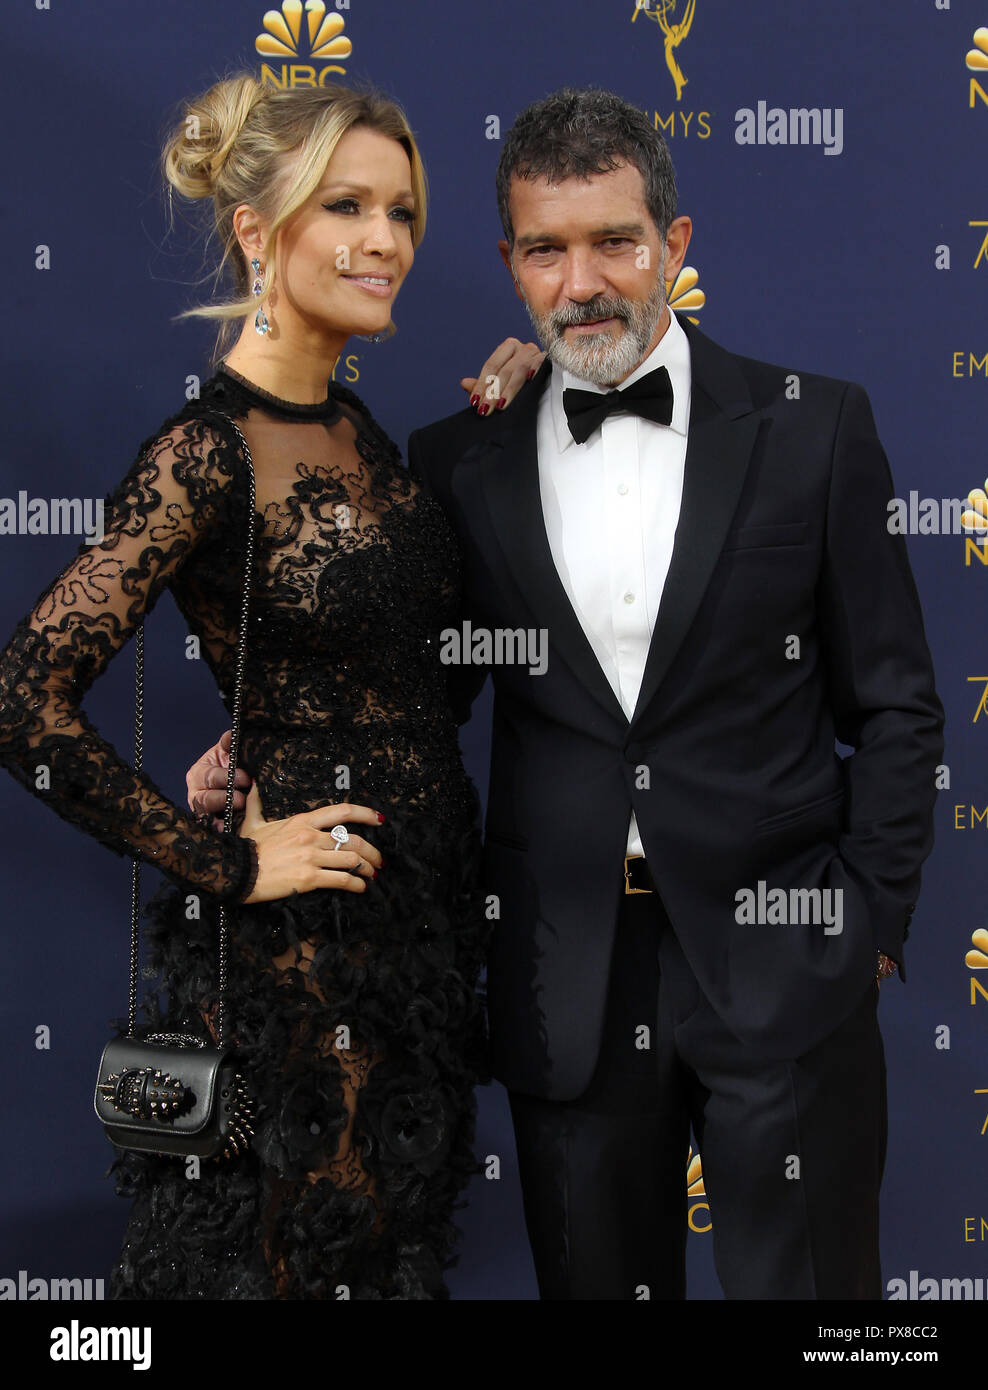 70th Emmy Awards (2018) Arrivals held at the Microsoft Theater in Los Angeles, California.  Featuring: Nicole Kimpel, Antonio Banderas Where: Los Angeles, California, United States When: 17 Sep 2018 Credit: Adriana M. Barraza/WENN.com Stock Photo